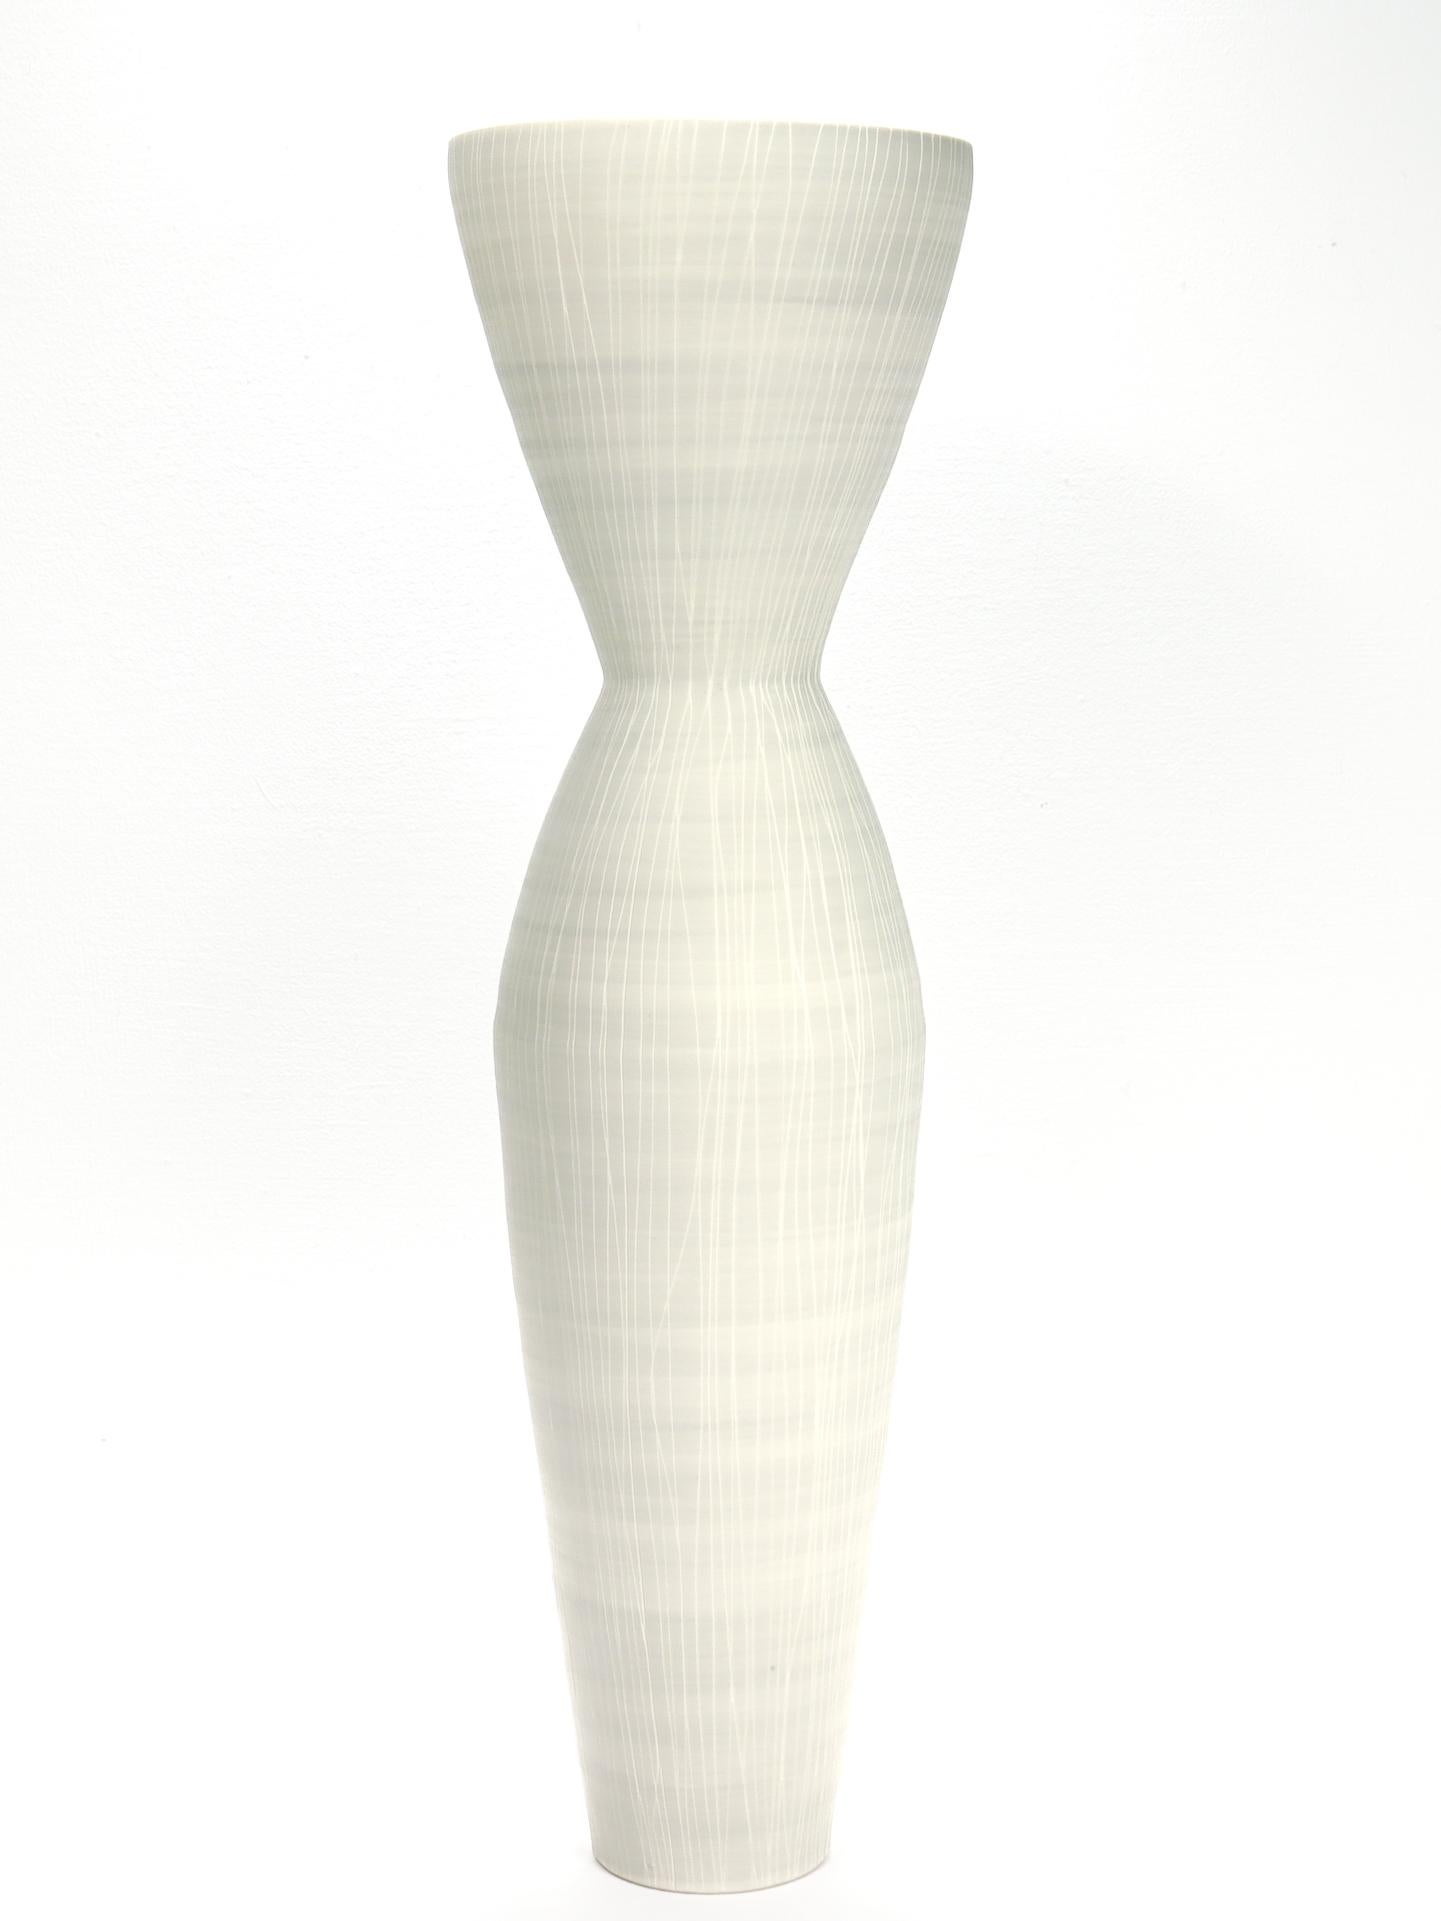 A fine Modern studio vase.

Anna Sykora, vases Sgraffito vases, 2014. Porcelain, terra sigillata

By Anna Sykora. 

With a white porcelain body with a light grey terra sigillata slip glaze.

With sgraffito or incised decoration around the